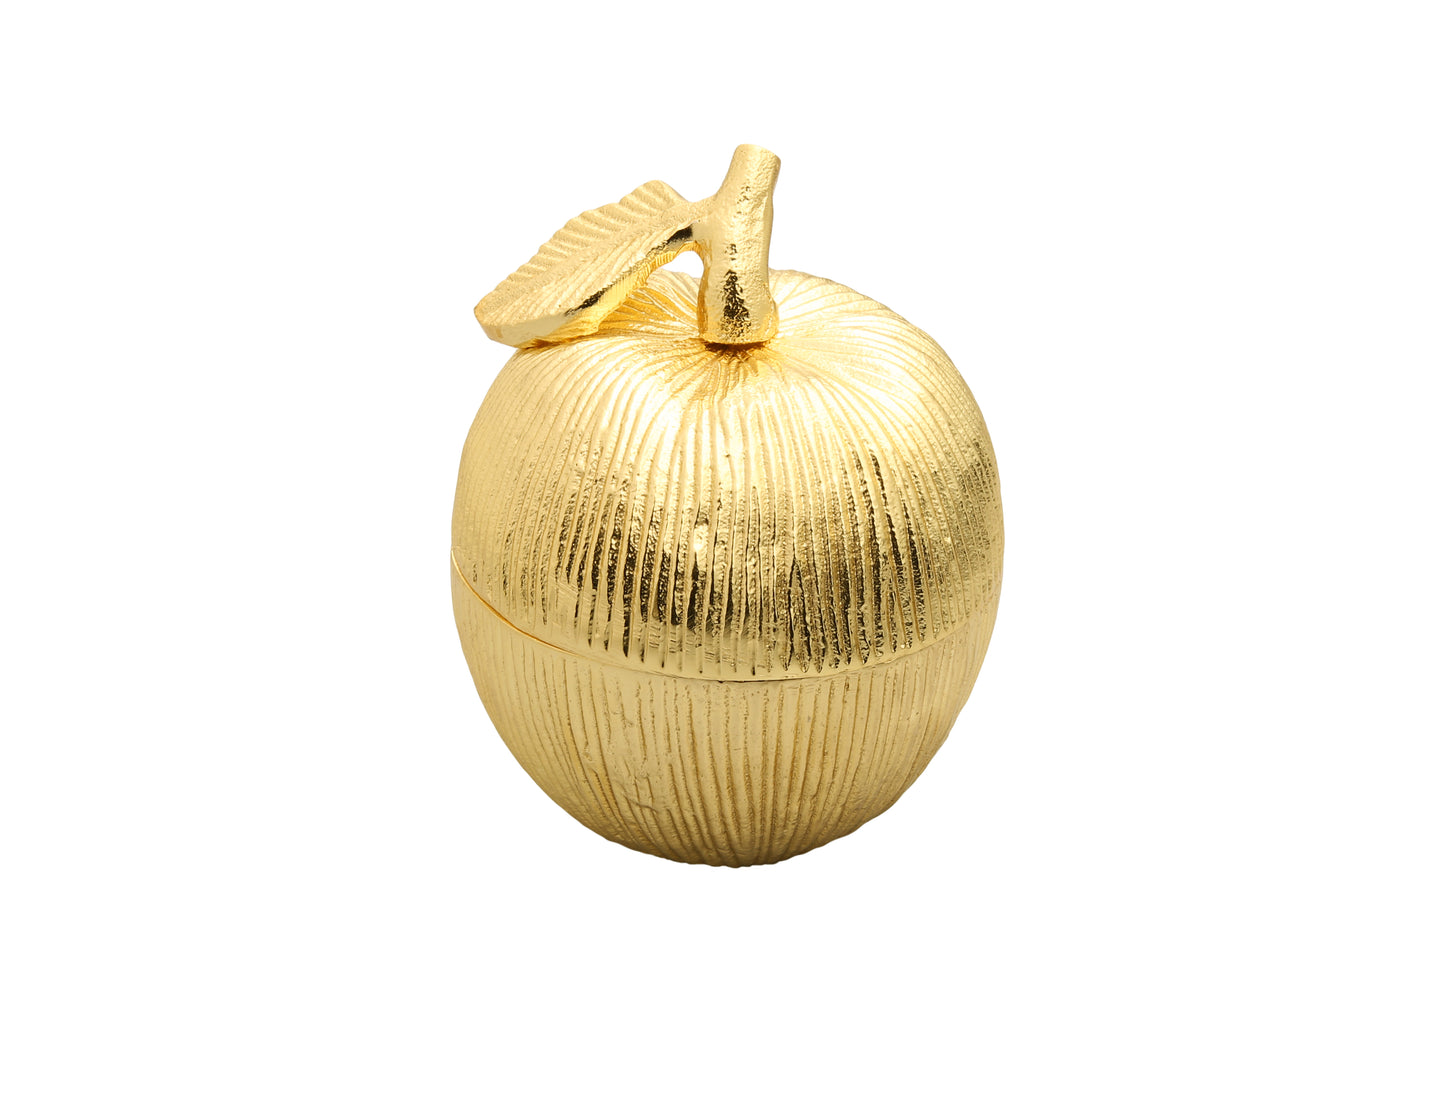 Gold Apple Shaped Honey Jar with Spoon - 3.75